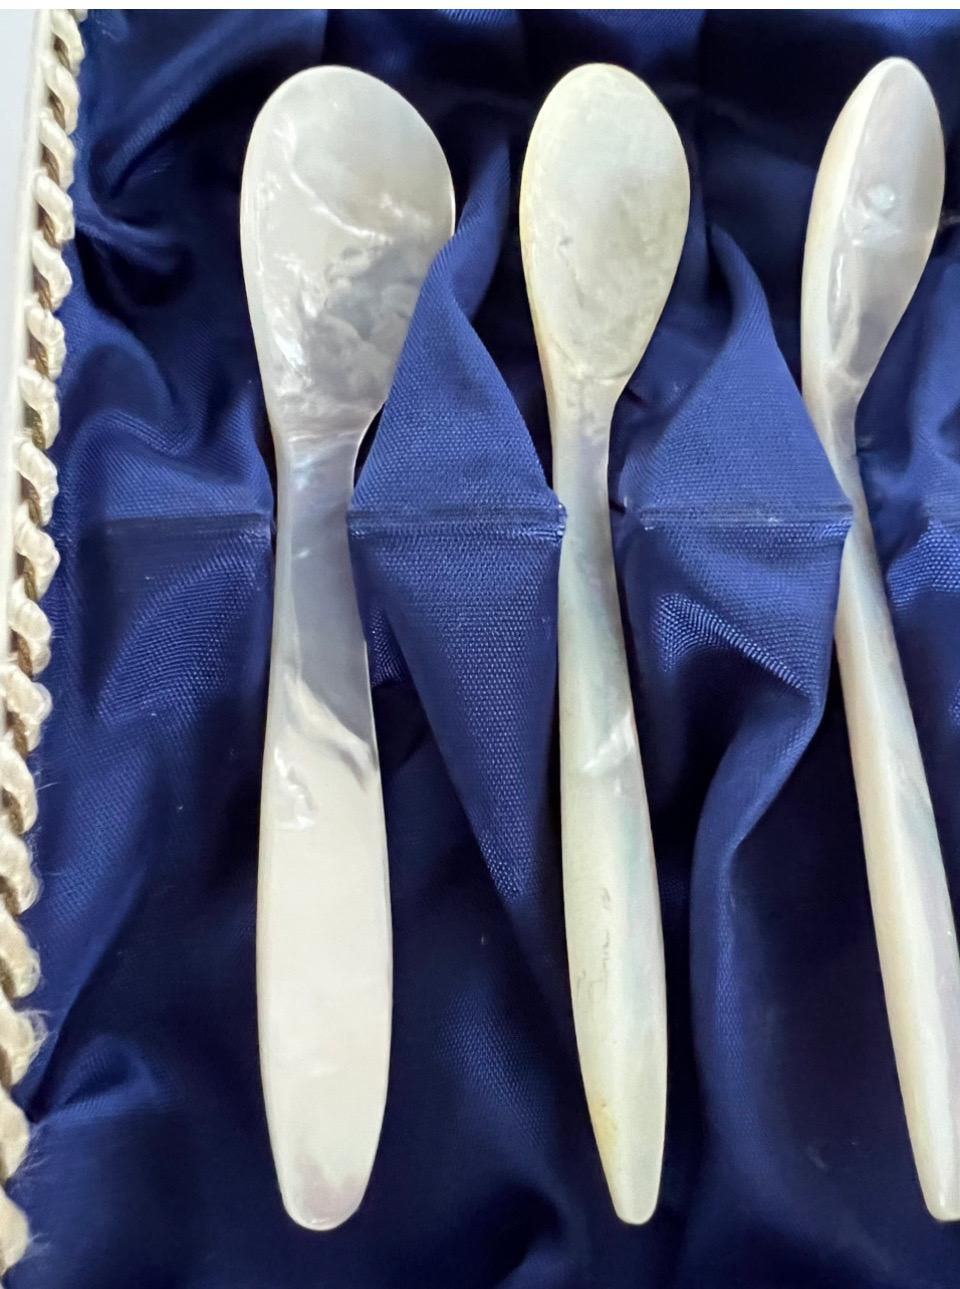 Beautiful vintage set of 6 caviar Mother of Pearl spoons in original box 
Delicate high end spoons that will set your table setup apart !
Original cardboard box with a bright blue satin interior and cording on the edge
 each spoons is about 4.5